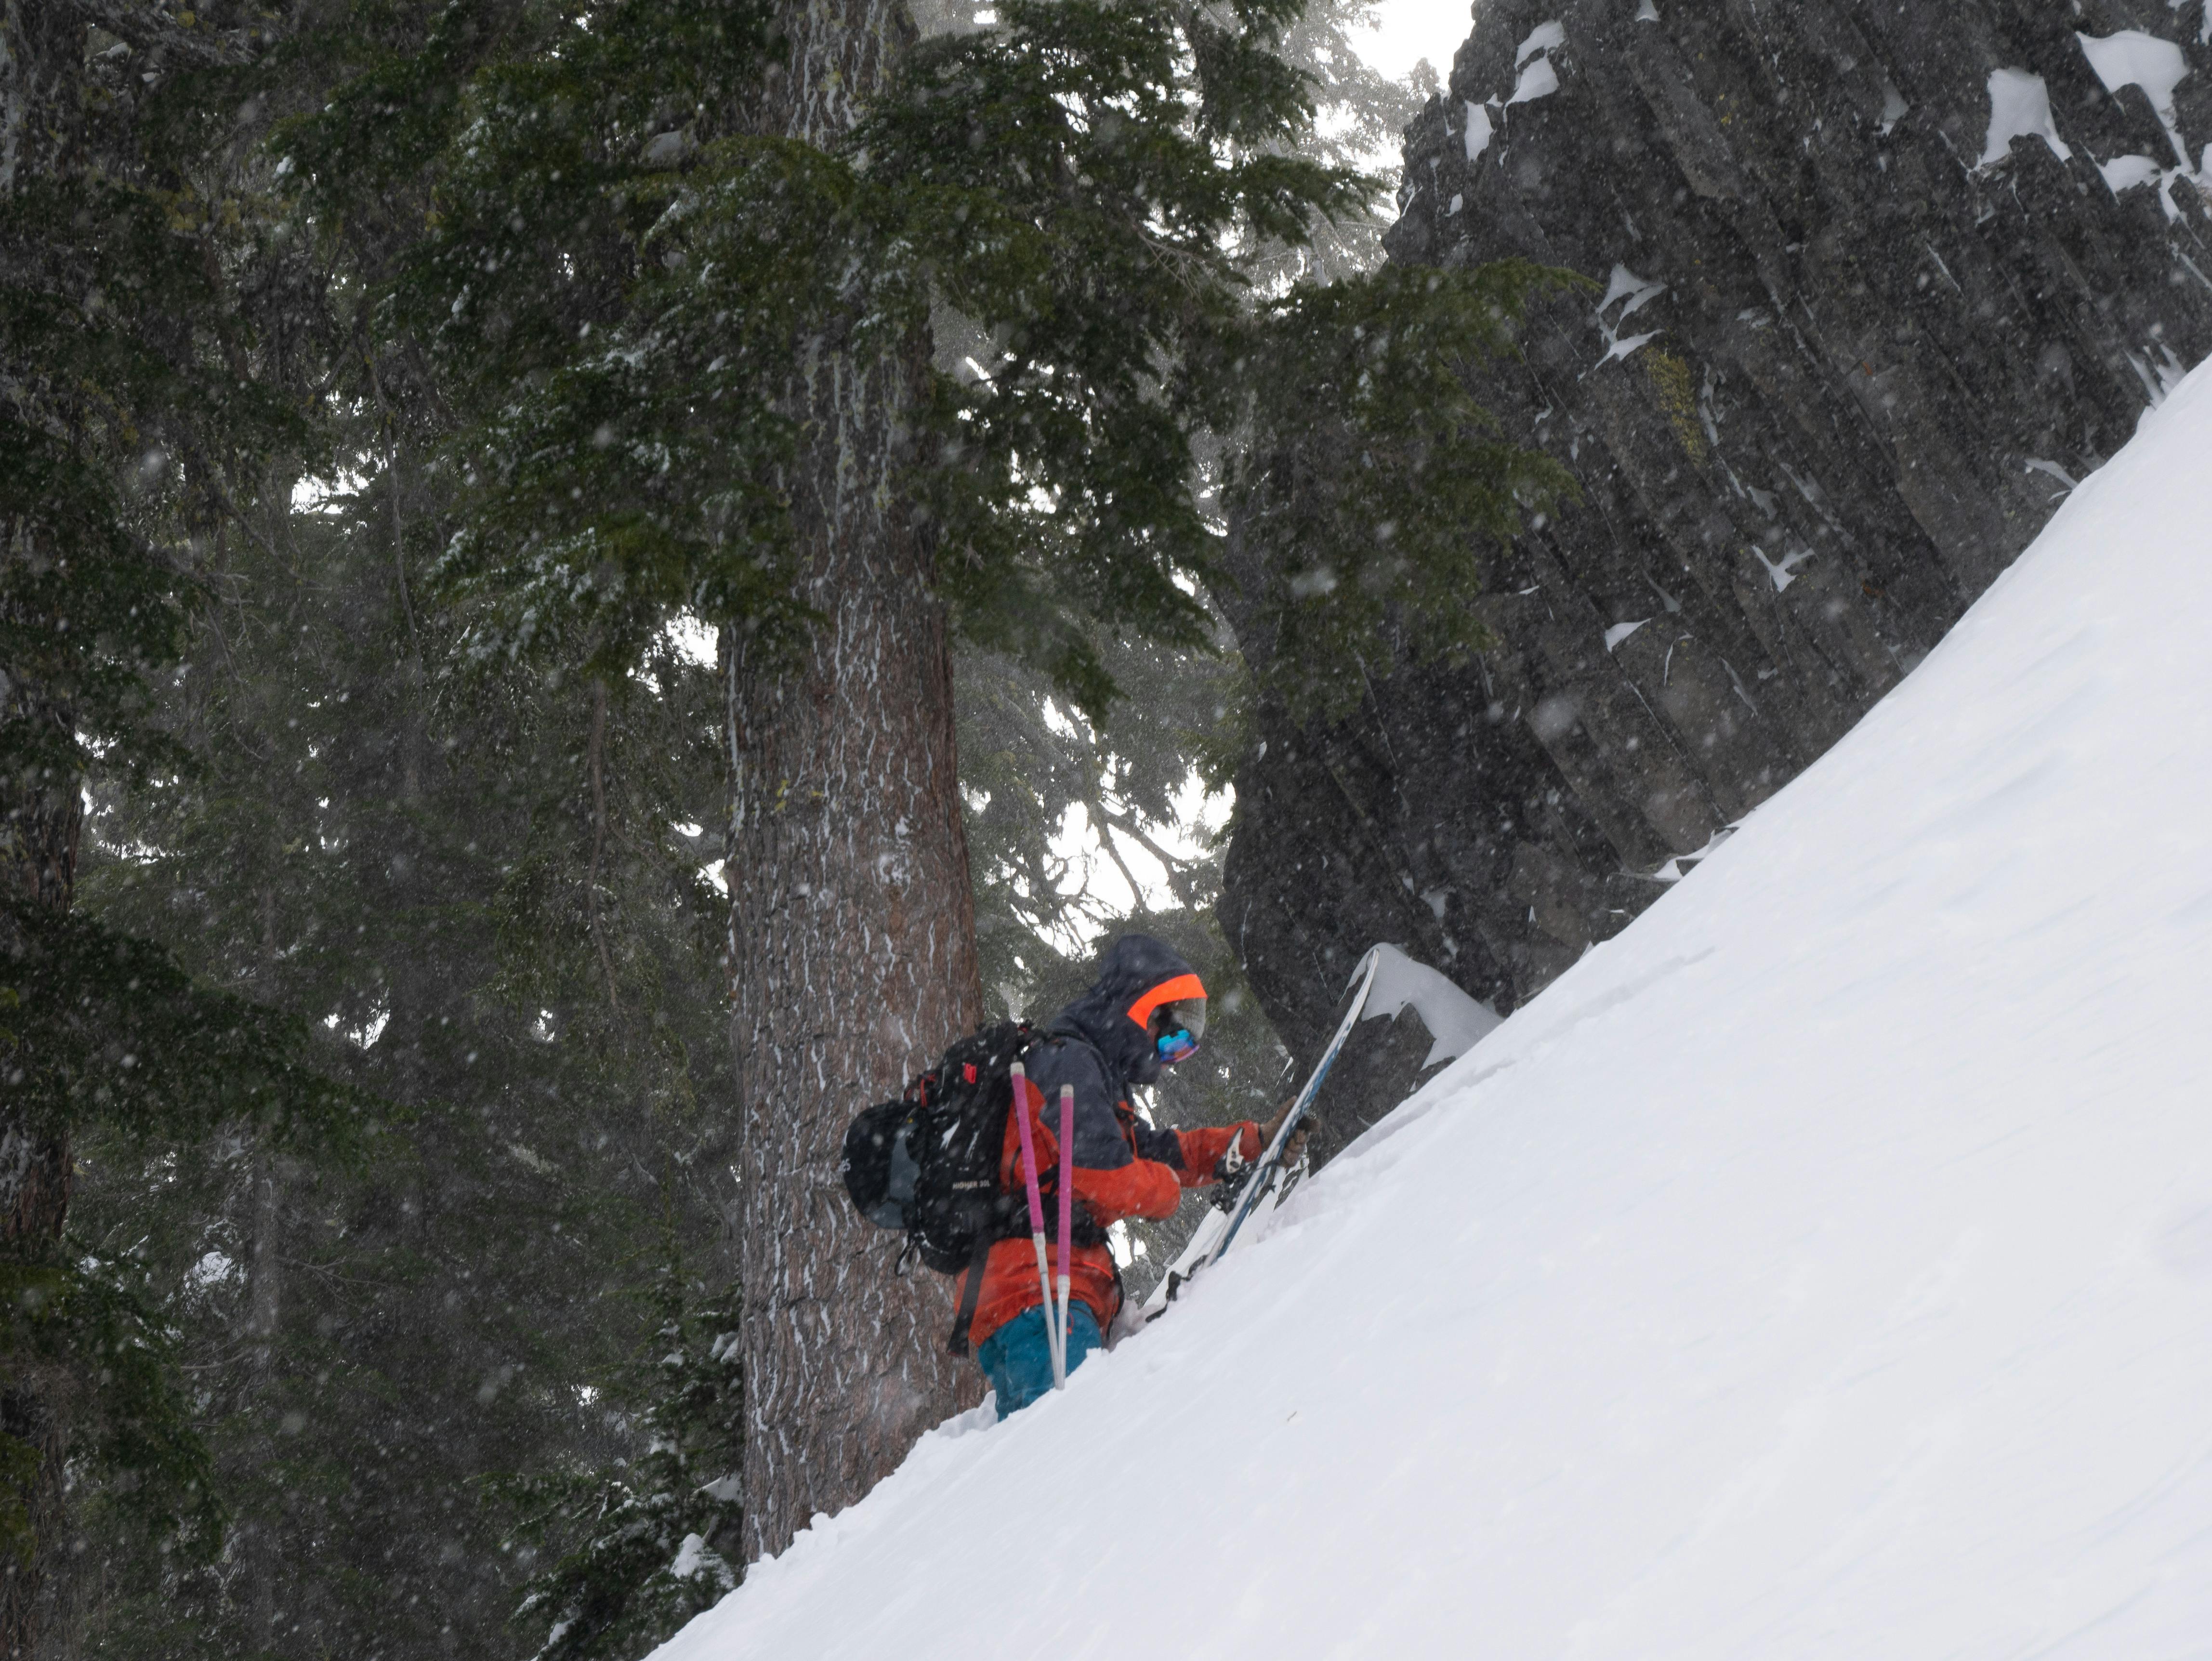 A backcountry skier digging a snow pit.